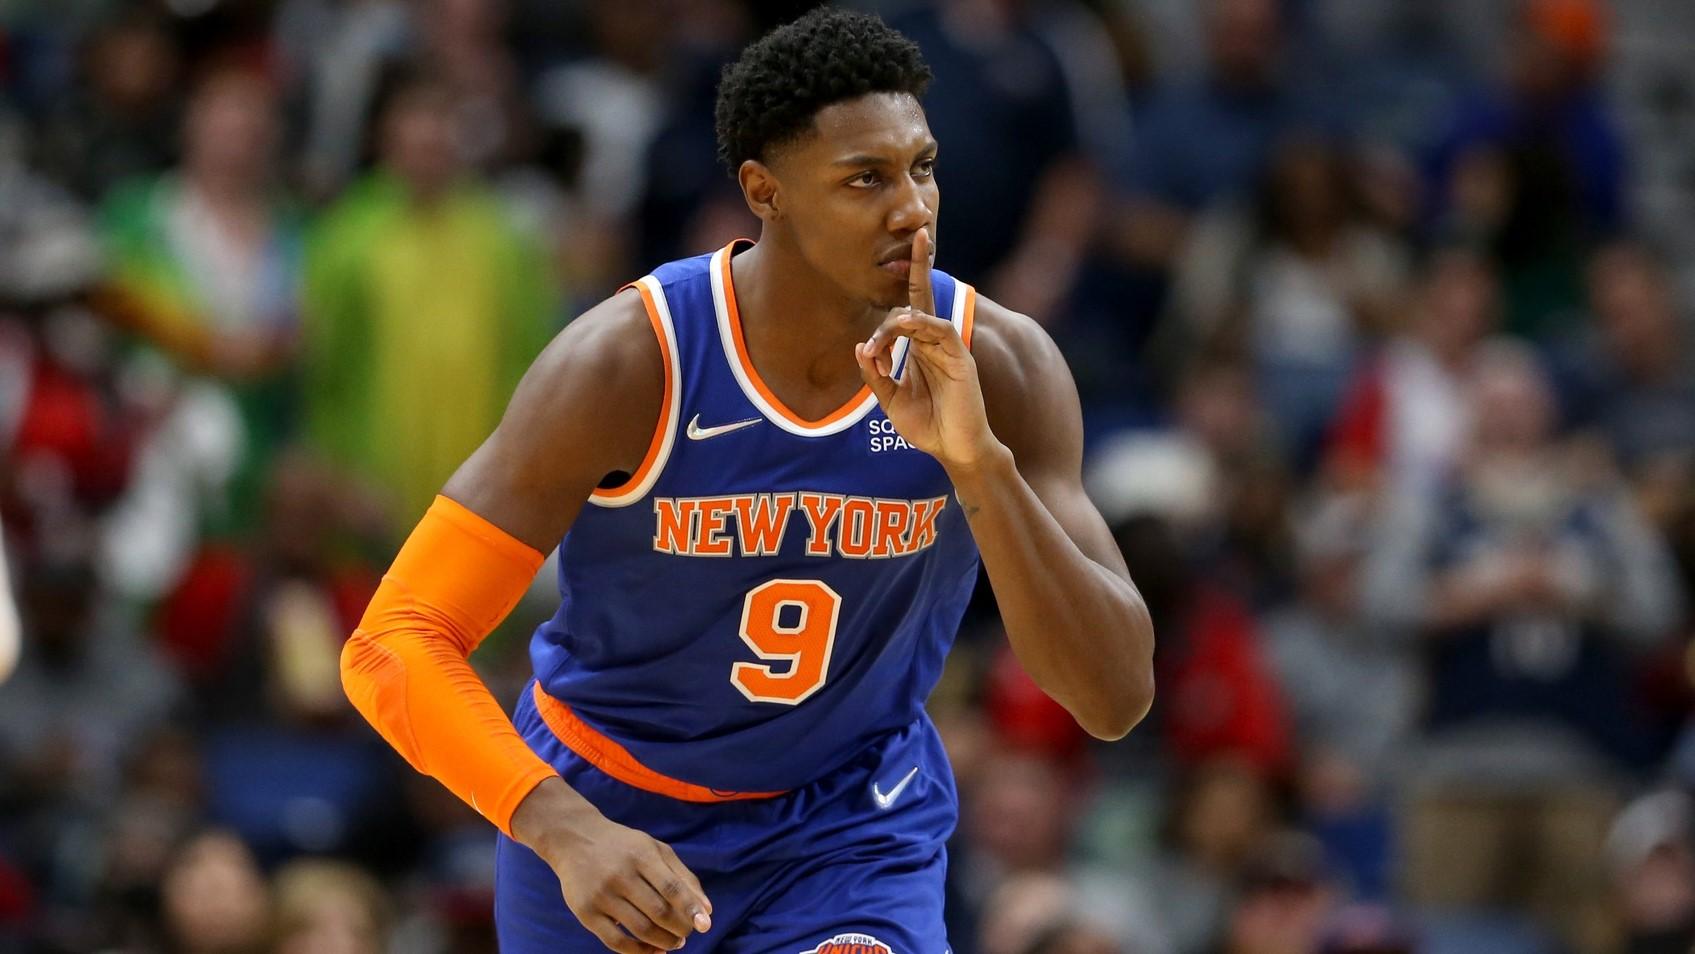 Oct 30, 2021; New Orleans, Louisiana, USA; New York Knicks guard RJ Barrett (9) gestures after a basket in the second half against the New Orleans Pelicans at the Smoothie King Center. / Chuck Cook-USA TODAY Sports